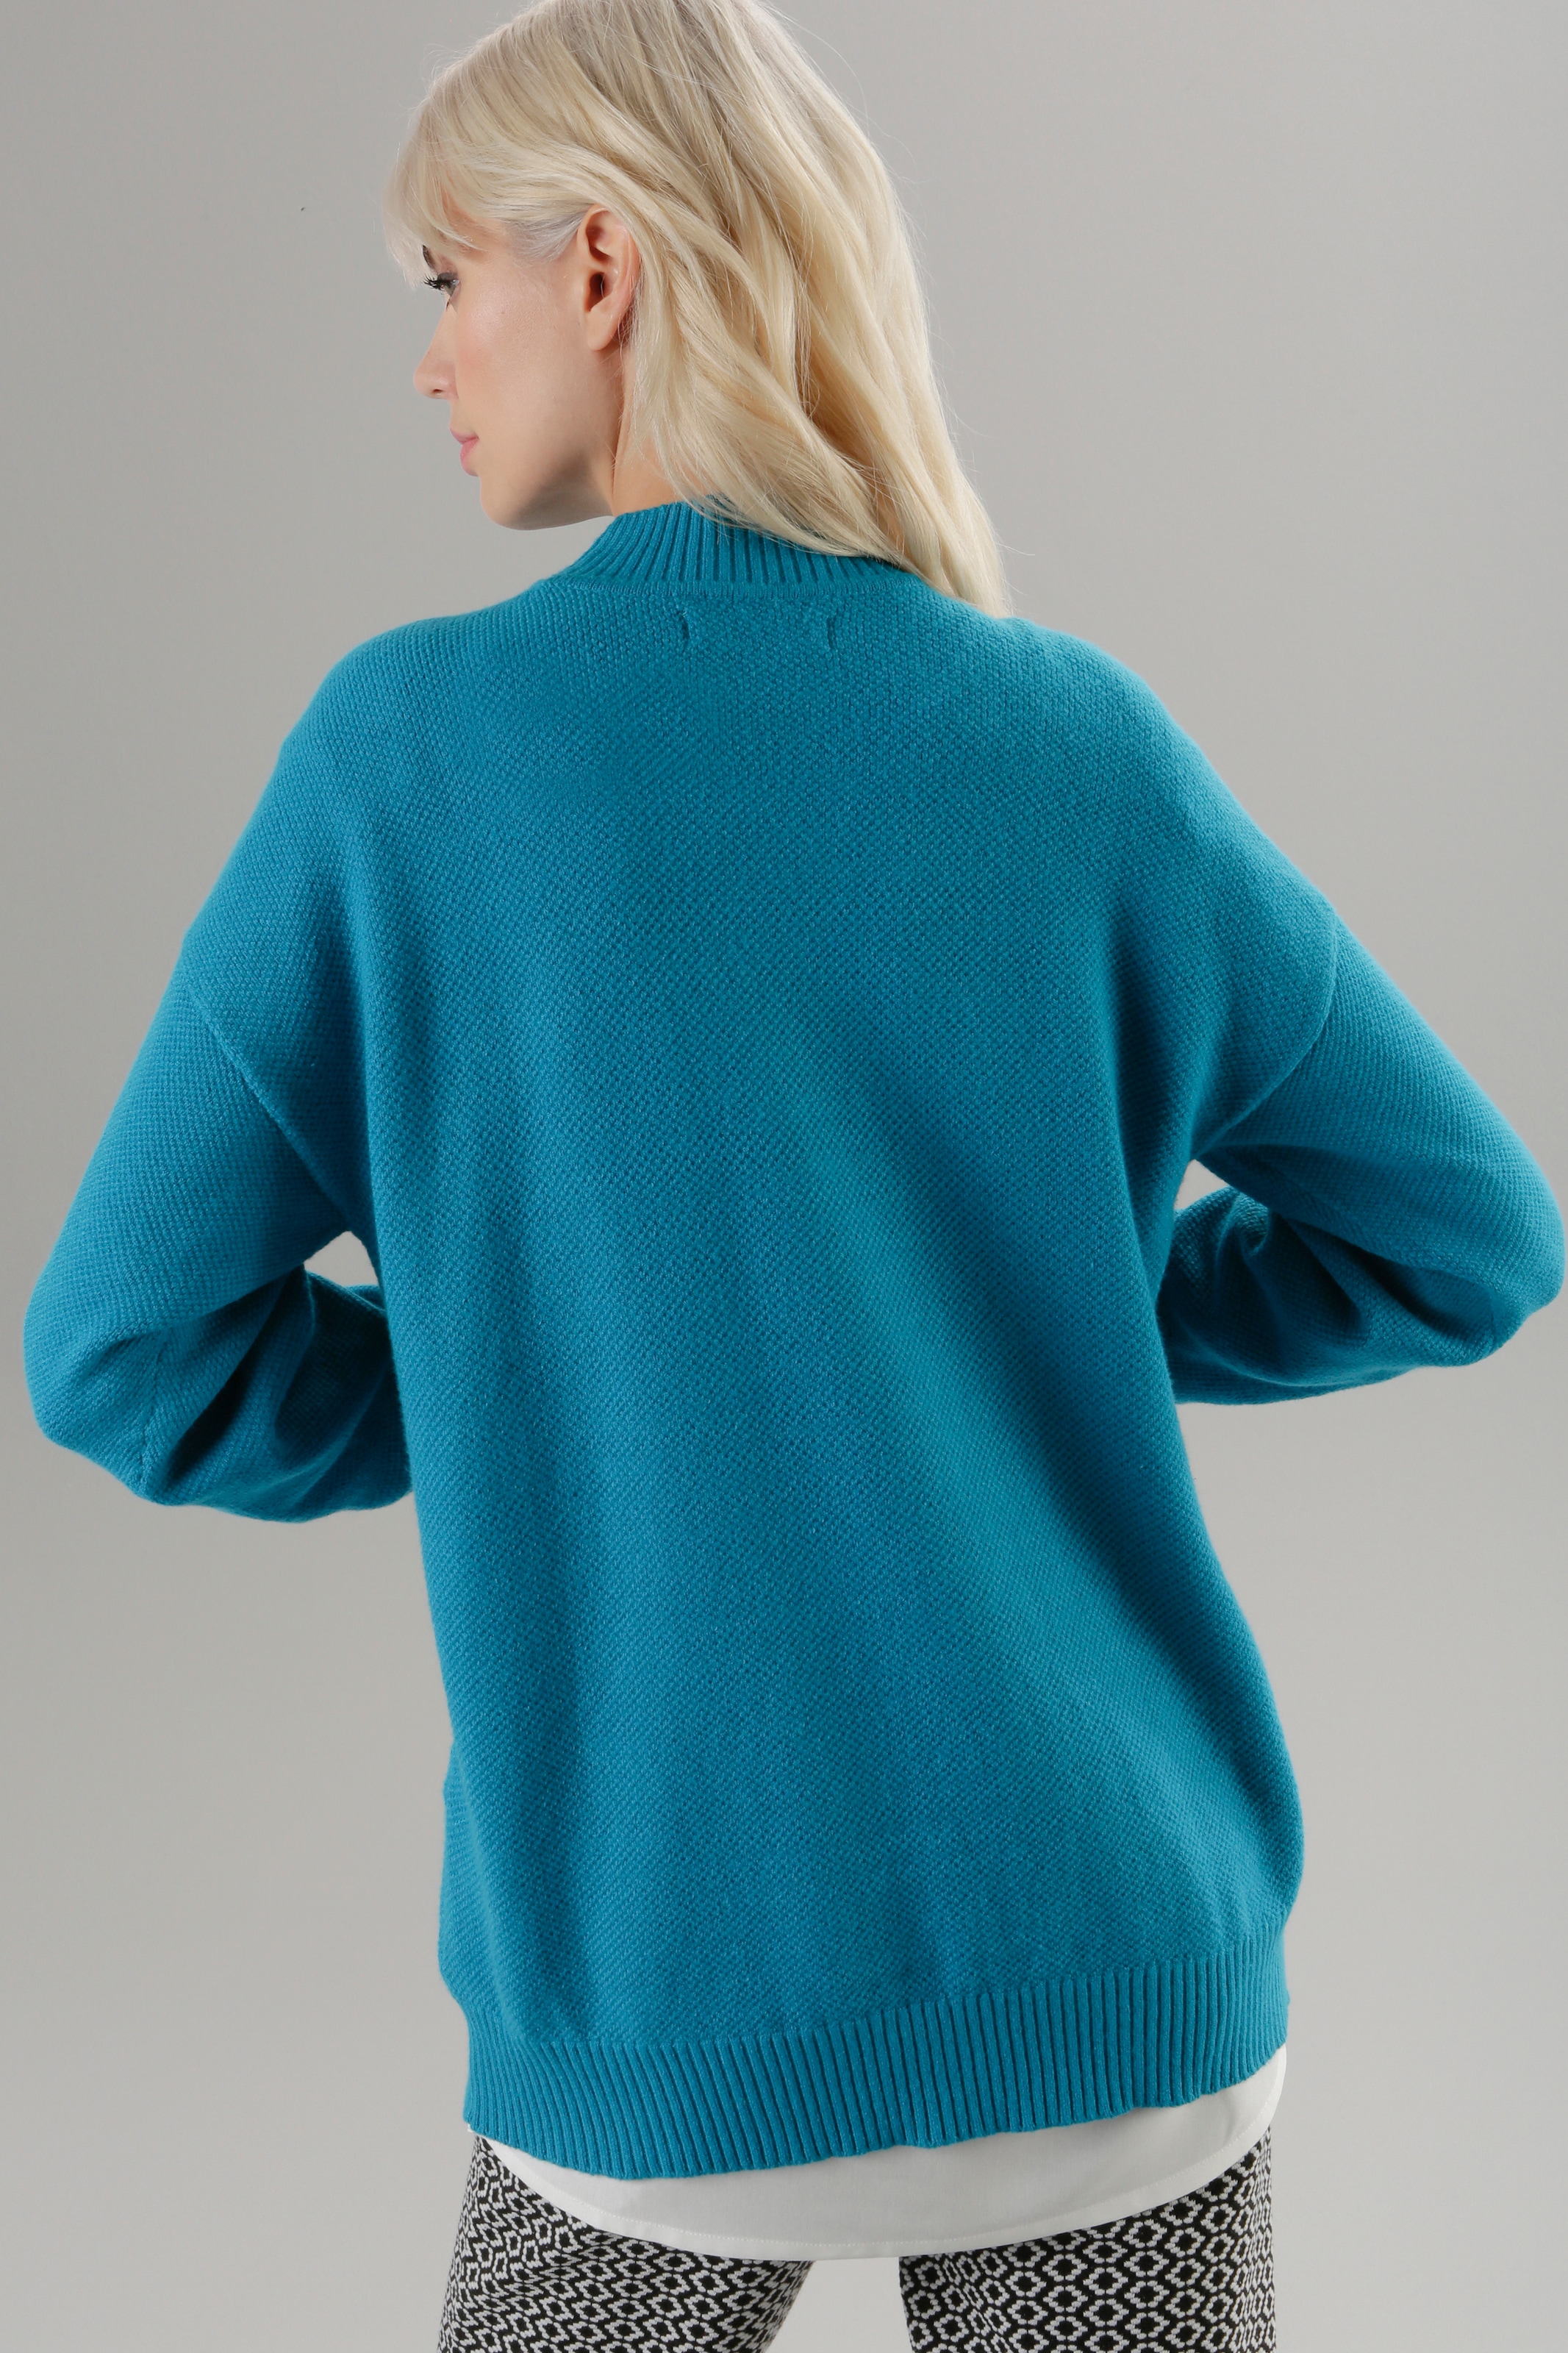 Perlfangmuster mit bei feinem SELECTED Aniston Strickpullover, online